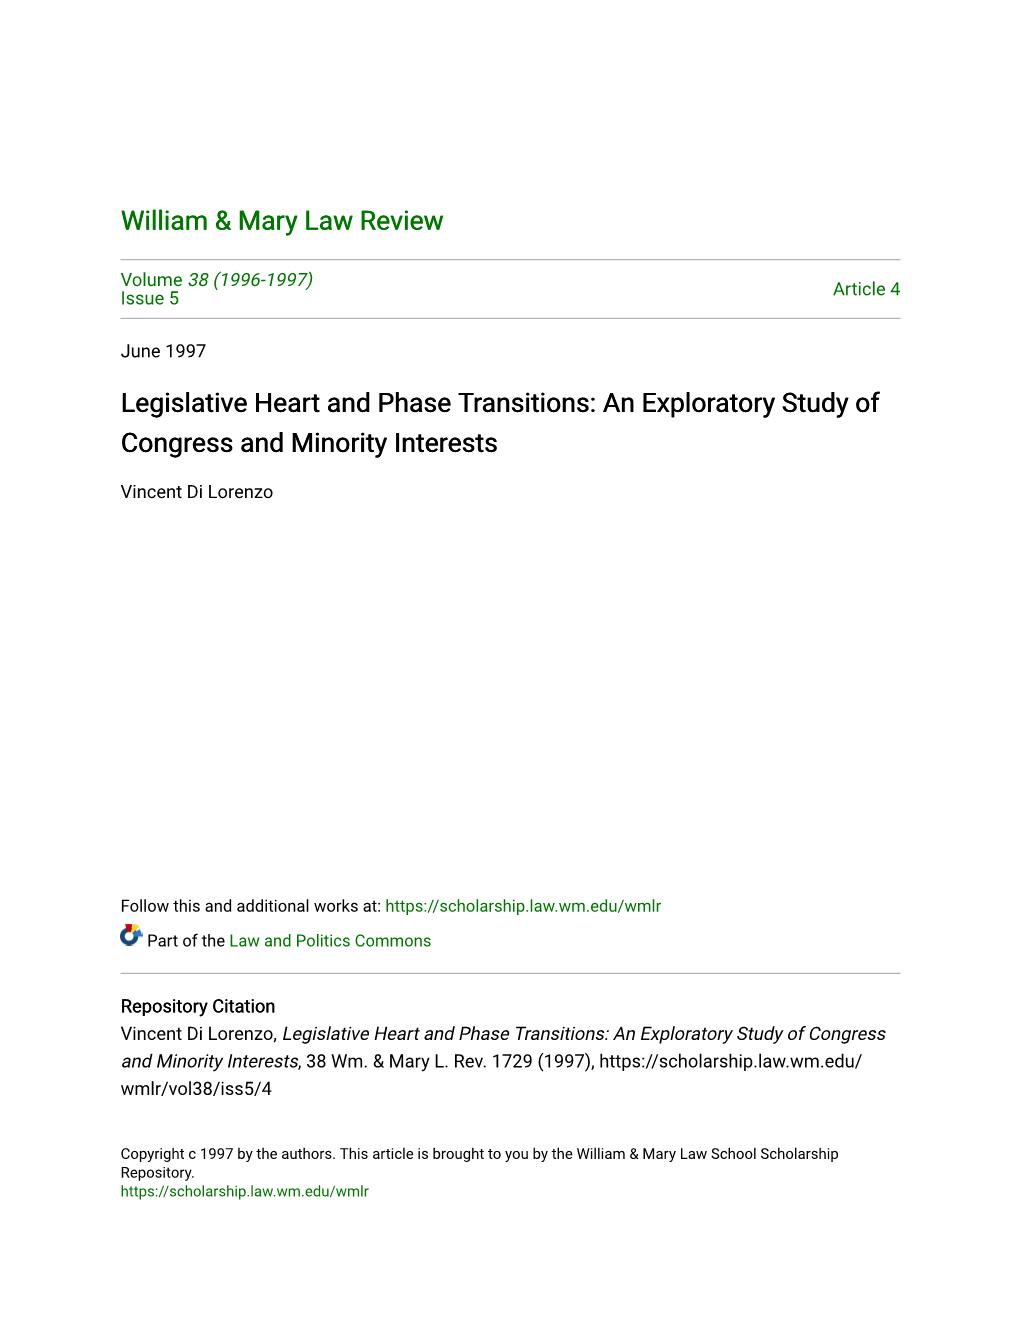 Legislative Heart and Phase Transitions: an Exploratory Study of Congress and Minority Interests